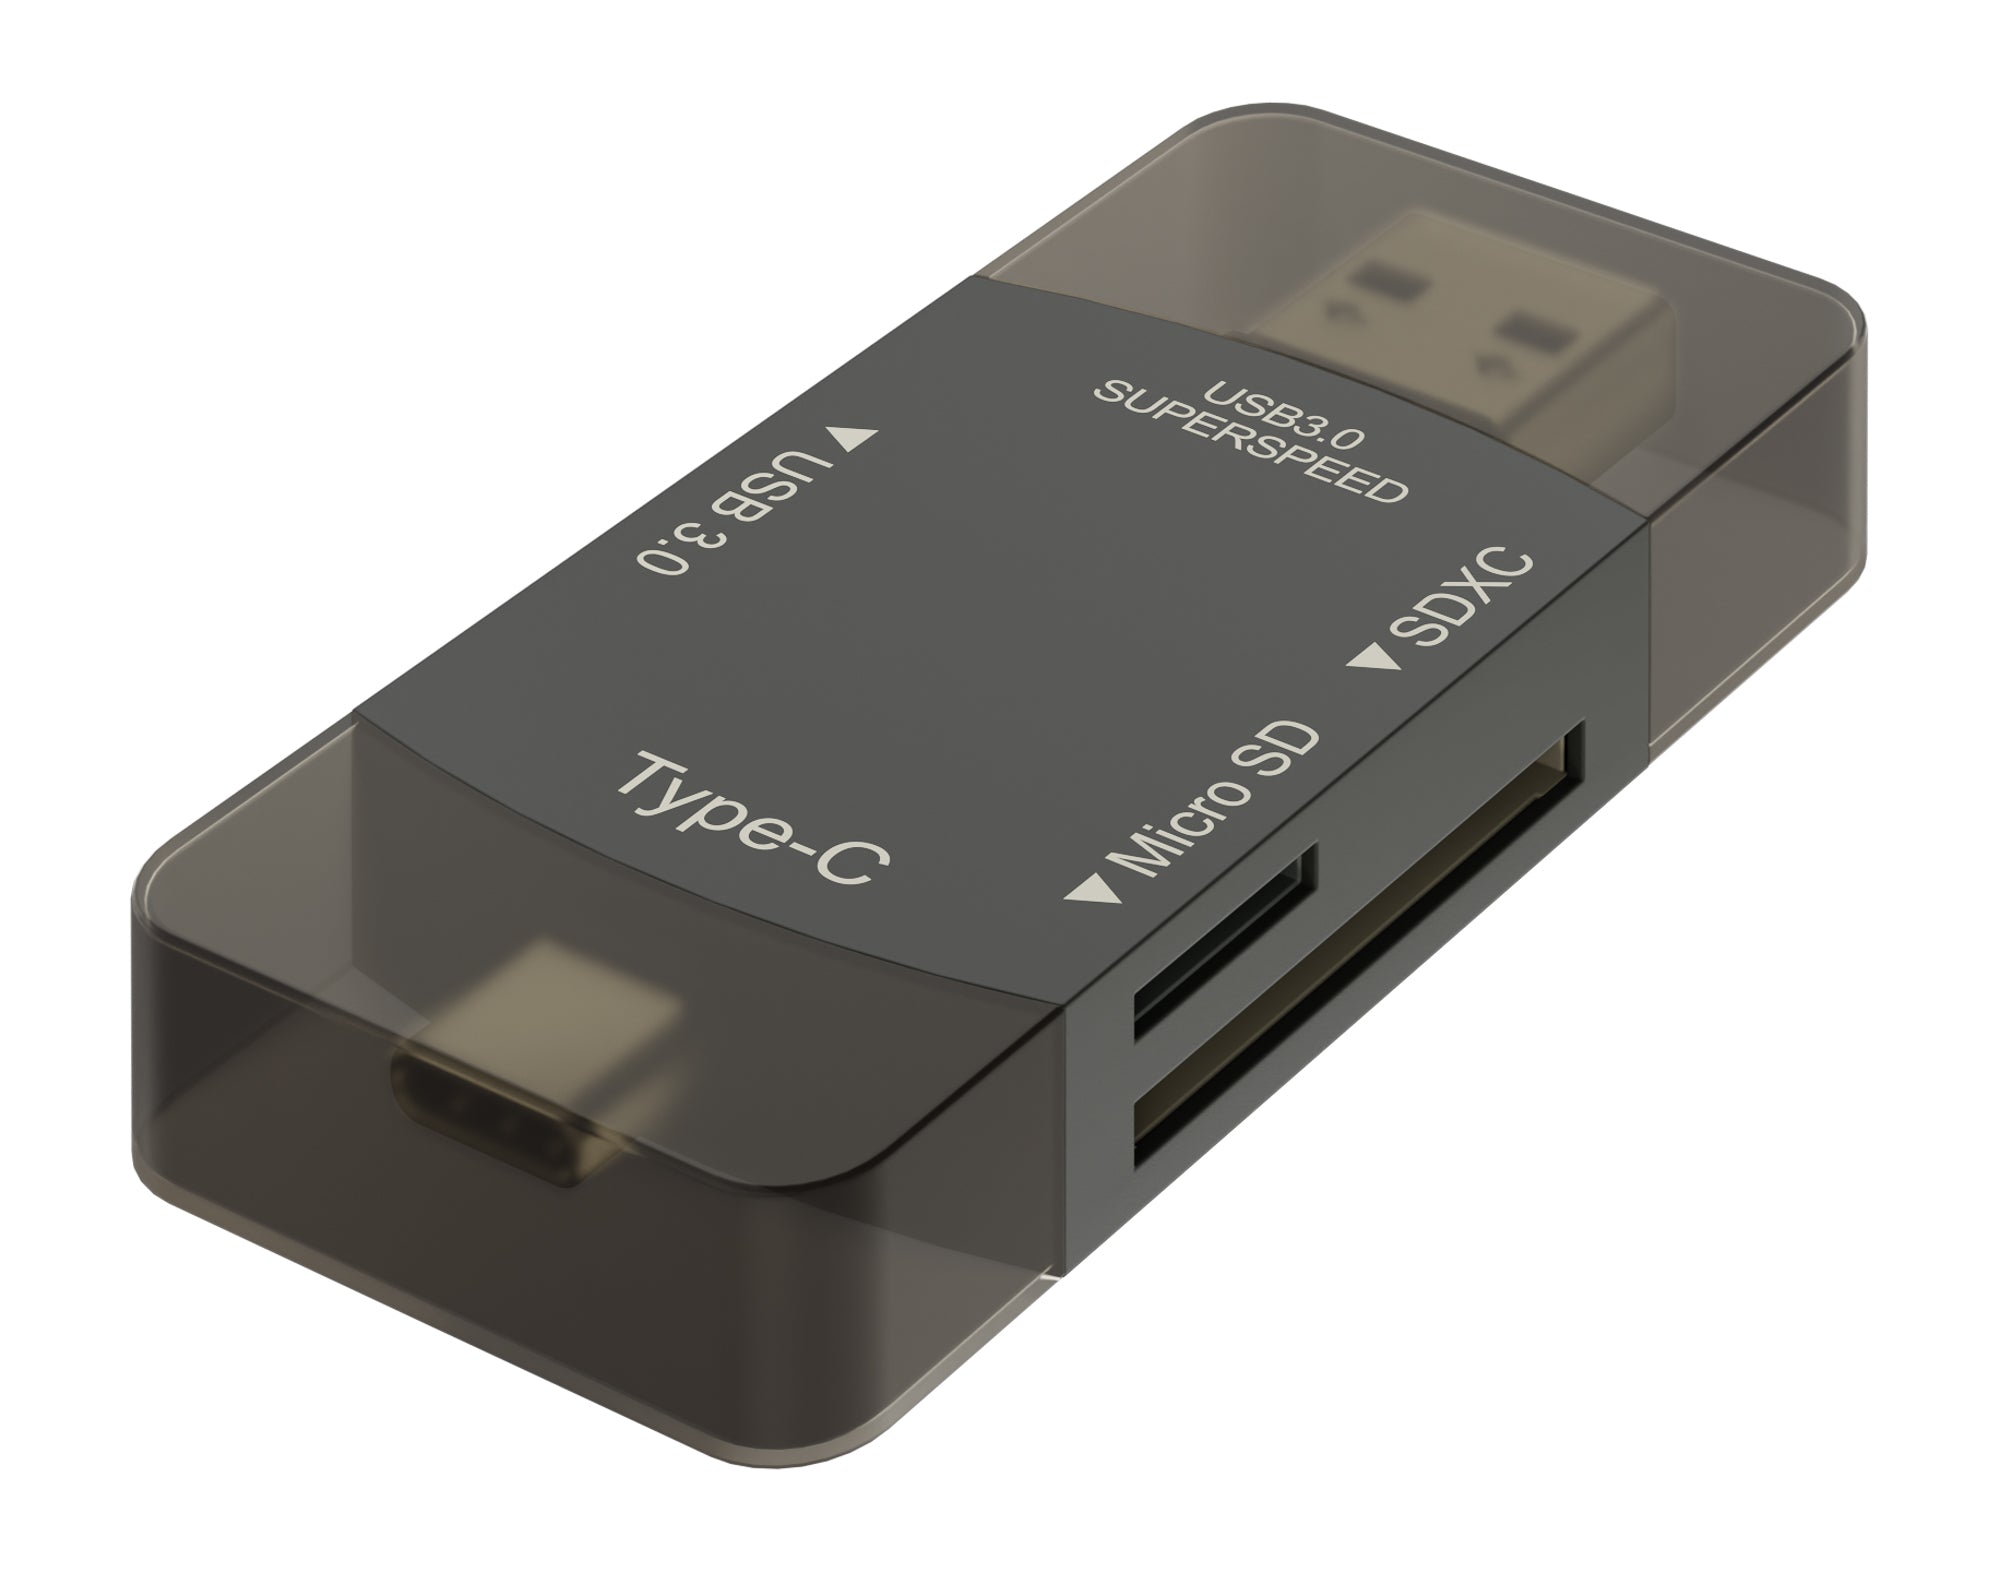 Newell USB "On The Go" Hub 3in1 - USB-C / USB-A Hub and USB-A pass-through MicroSD and SD cardreaders for phones/tablets or laptop - Graphite Colour